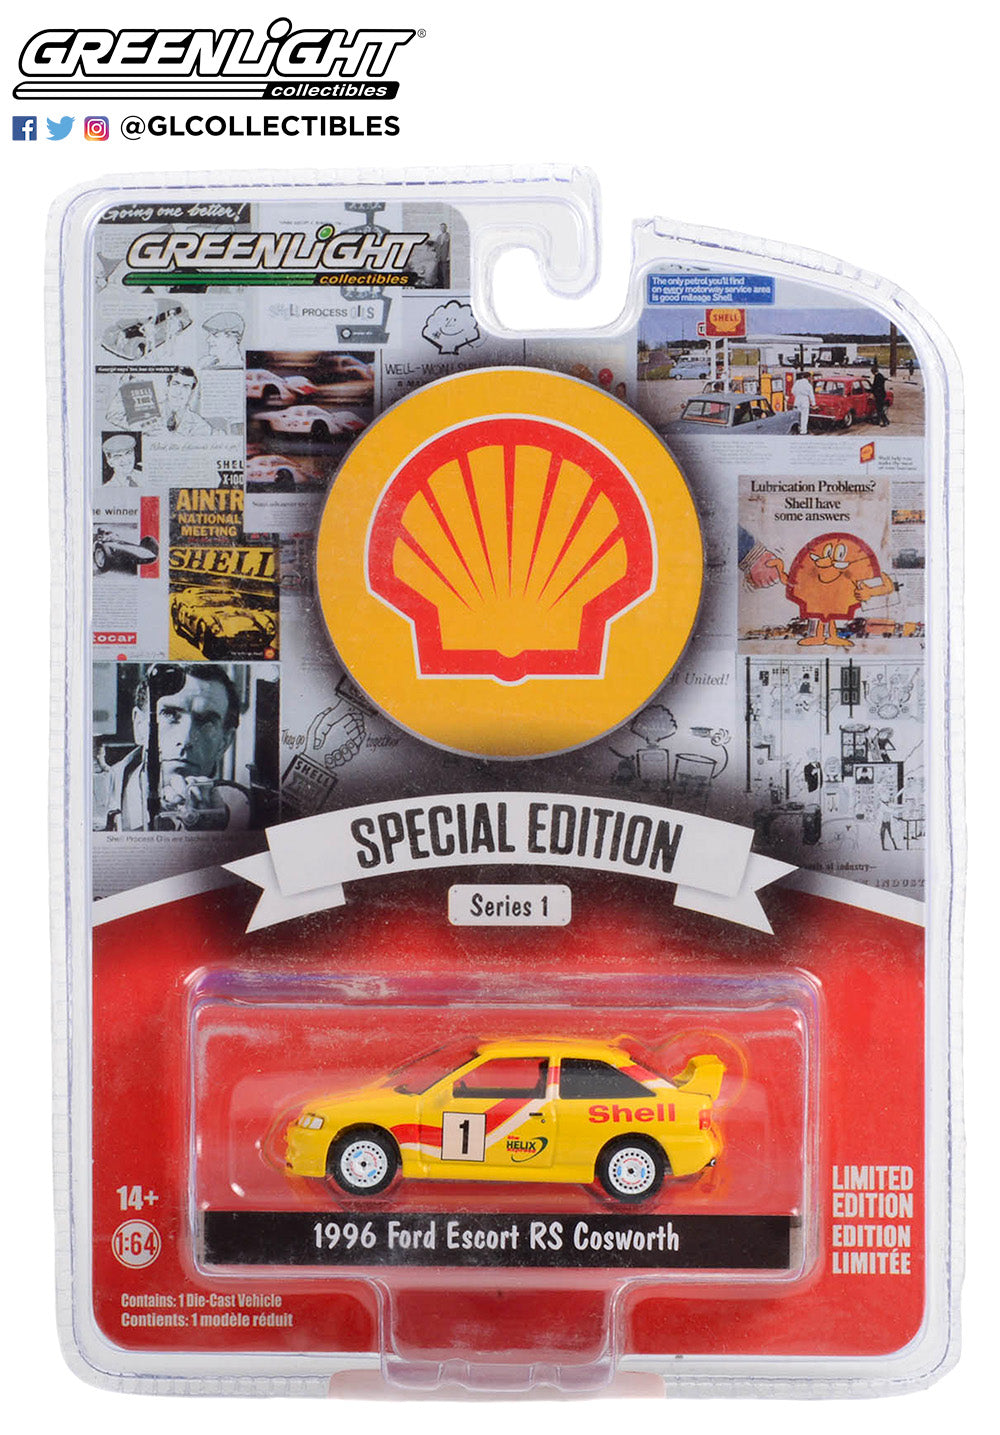 Shell Oil Special Edition Series 1 - 1996 Ford Escort RS Cosworth #1 Shell Helix